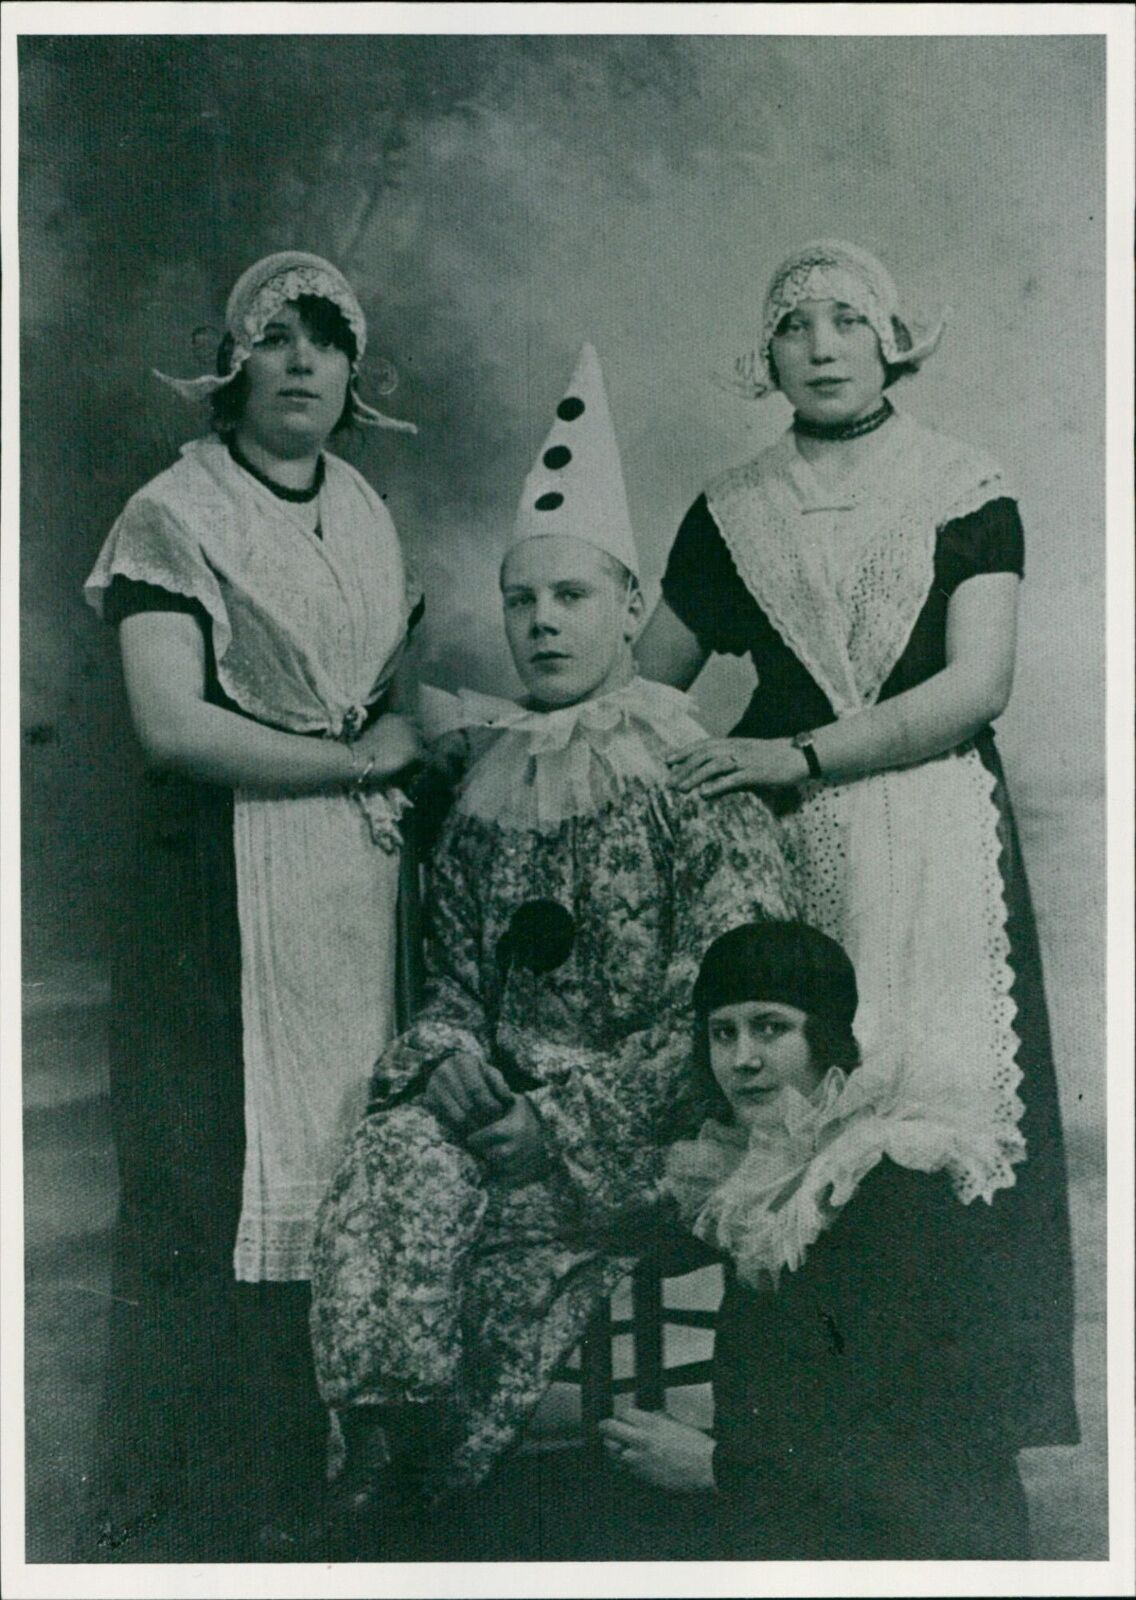 Carnival costumes in 1924 - Vintage Photograph 4538929